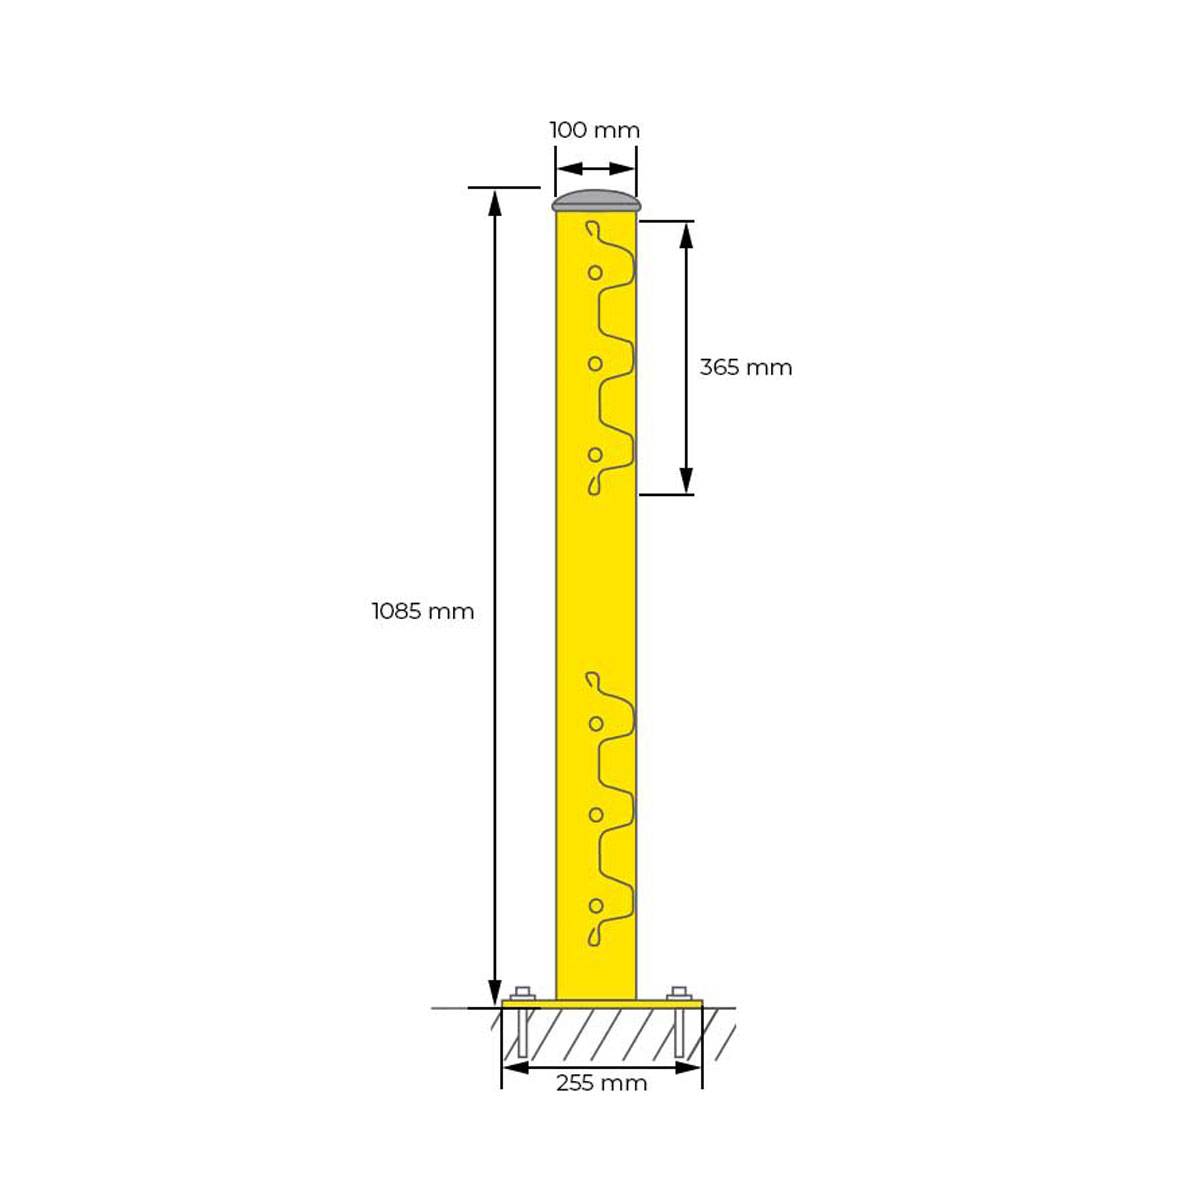 Vehicle Barrier Dimensions